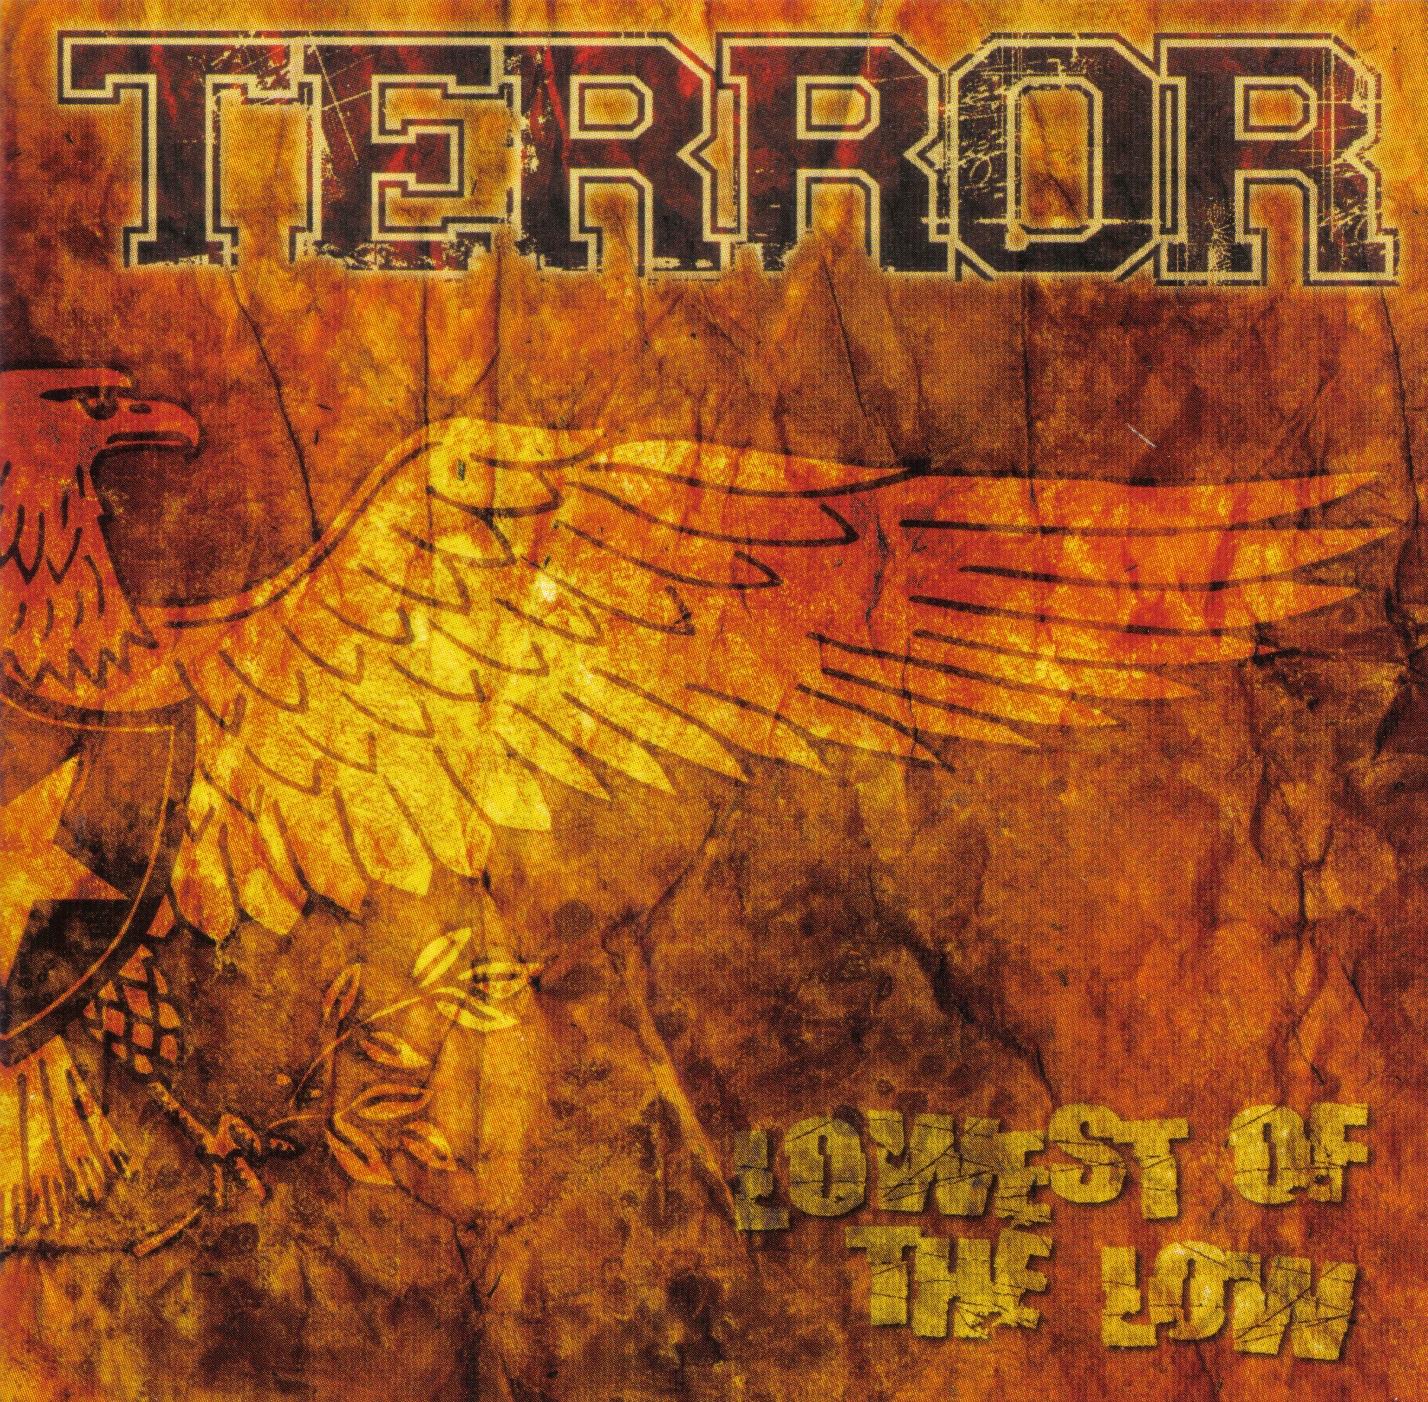 [00-terror-lowest_of_the_low-reissue-scan_front-2005-hxc.jpg]